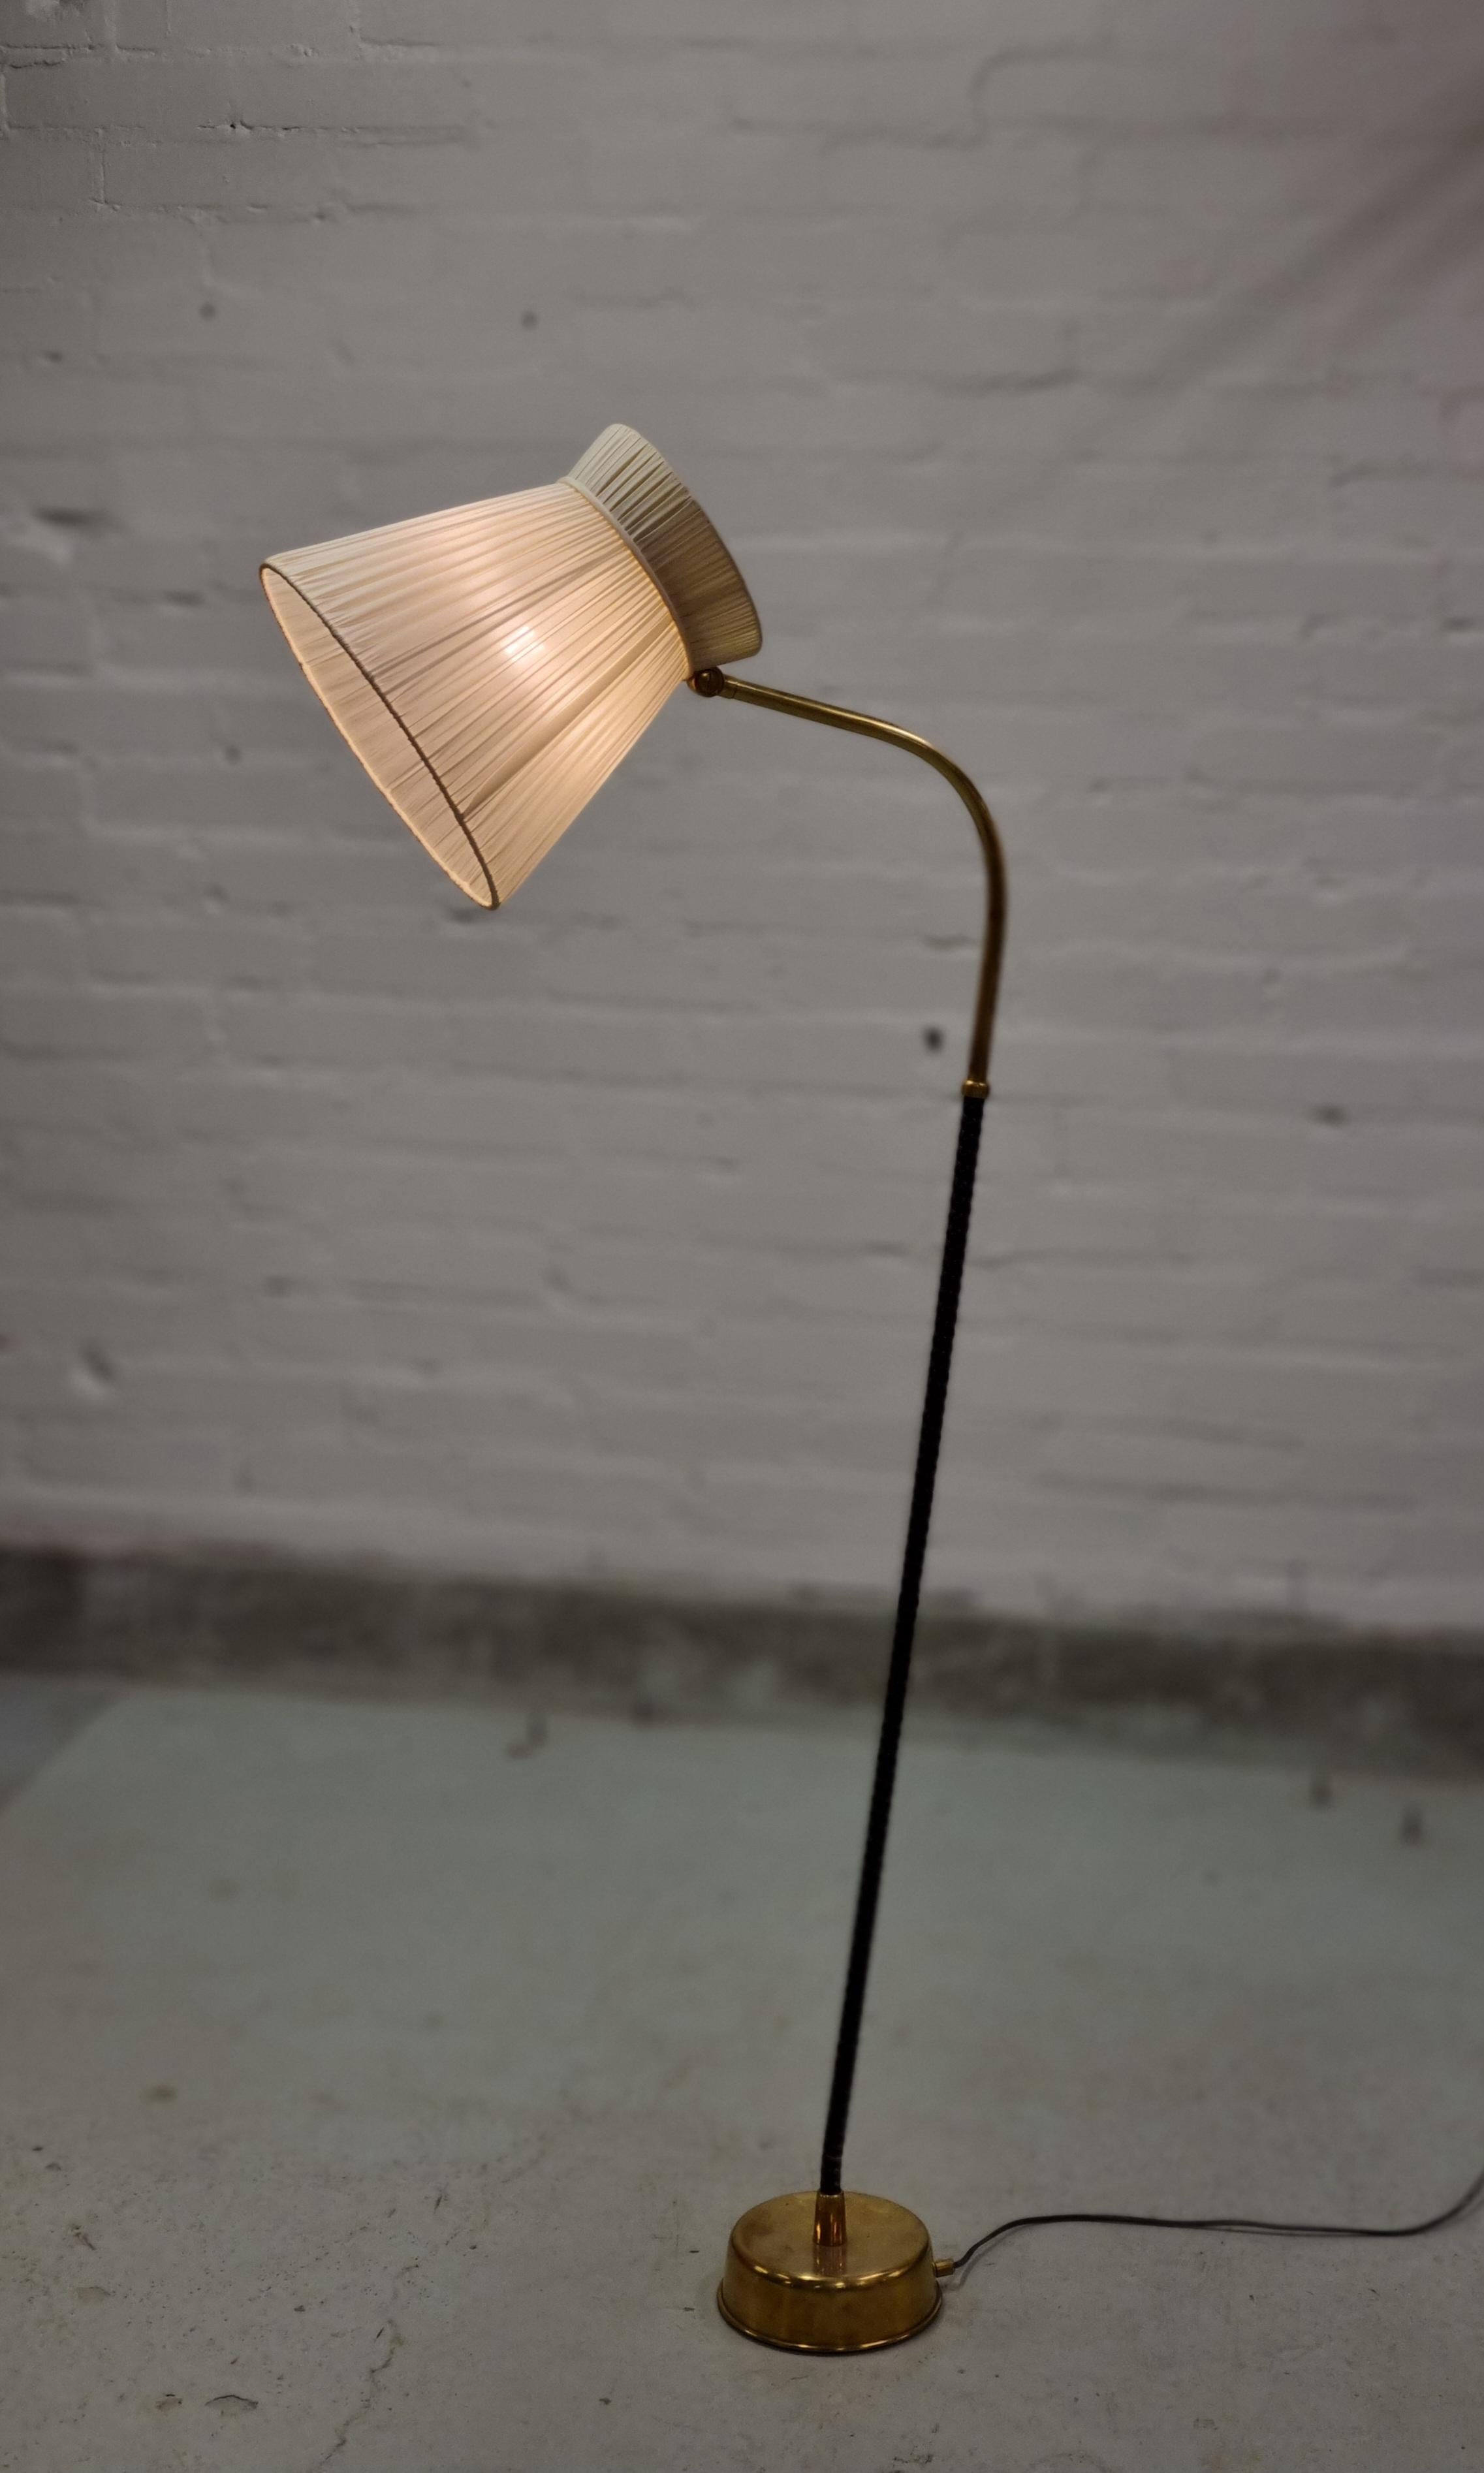 Rare Lisa Johansson-Papé floor lamp with adjustable shade and bent leg. The wrapping is black nylon. The lamp is in beautiful original Patina.

We recommend 1stdibs shipping on this item.